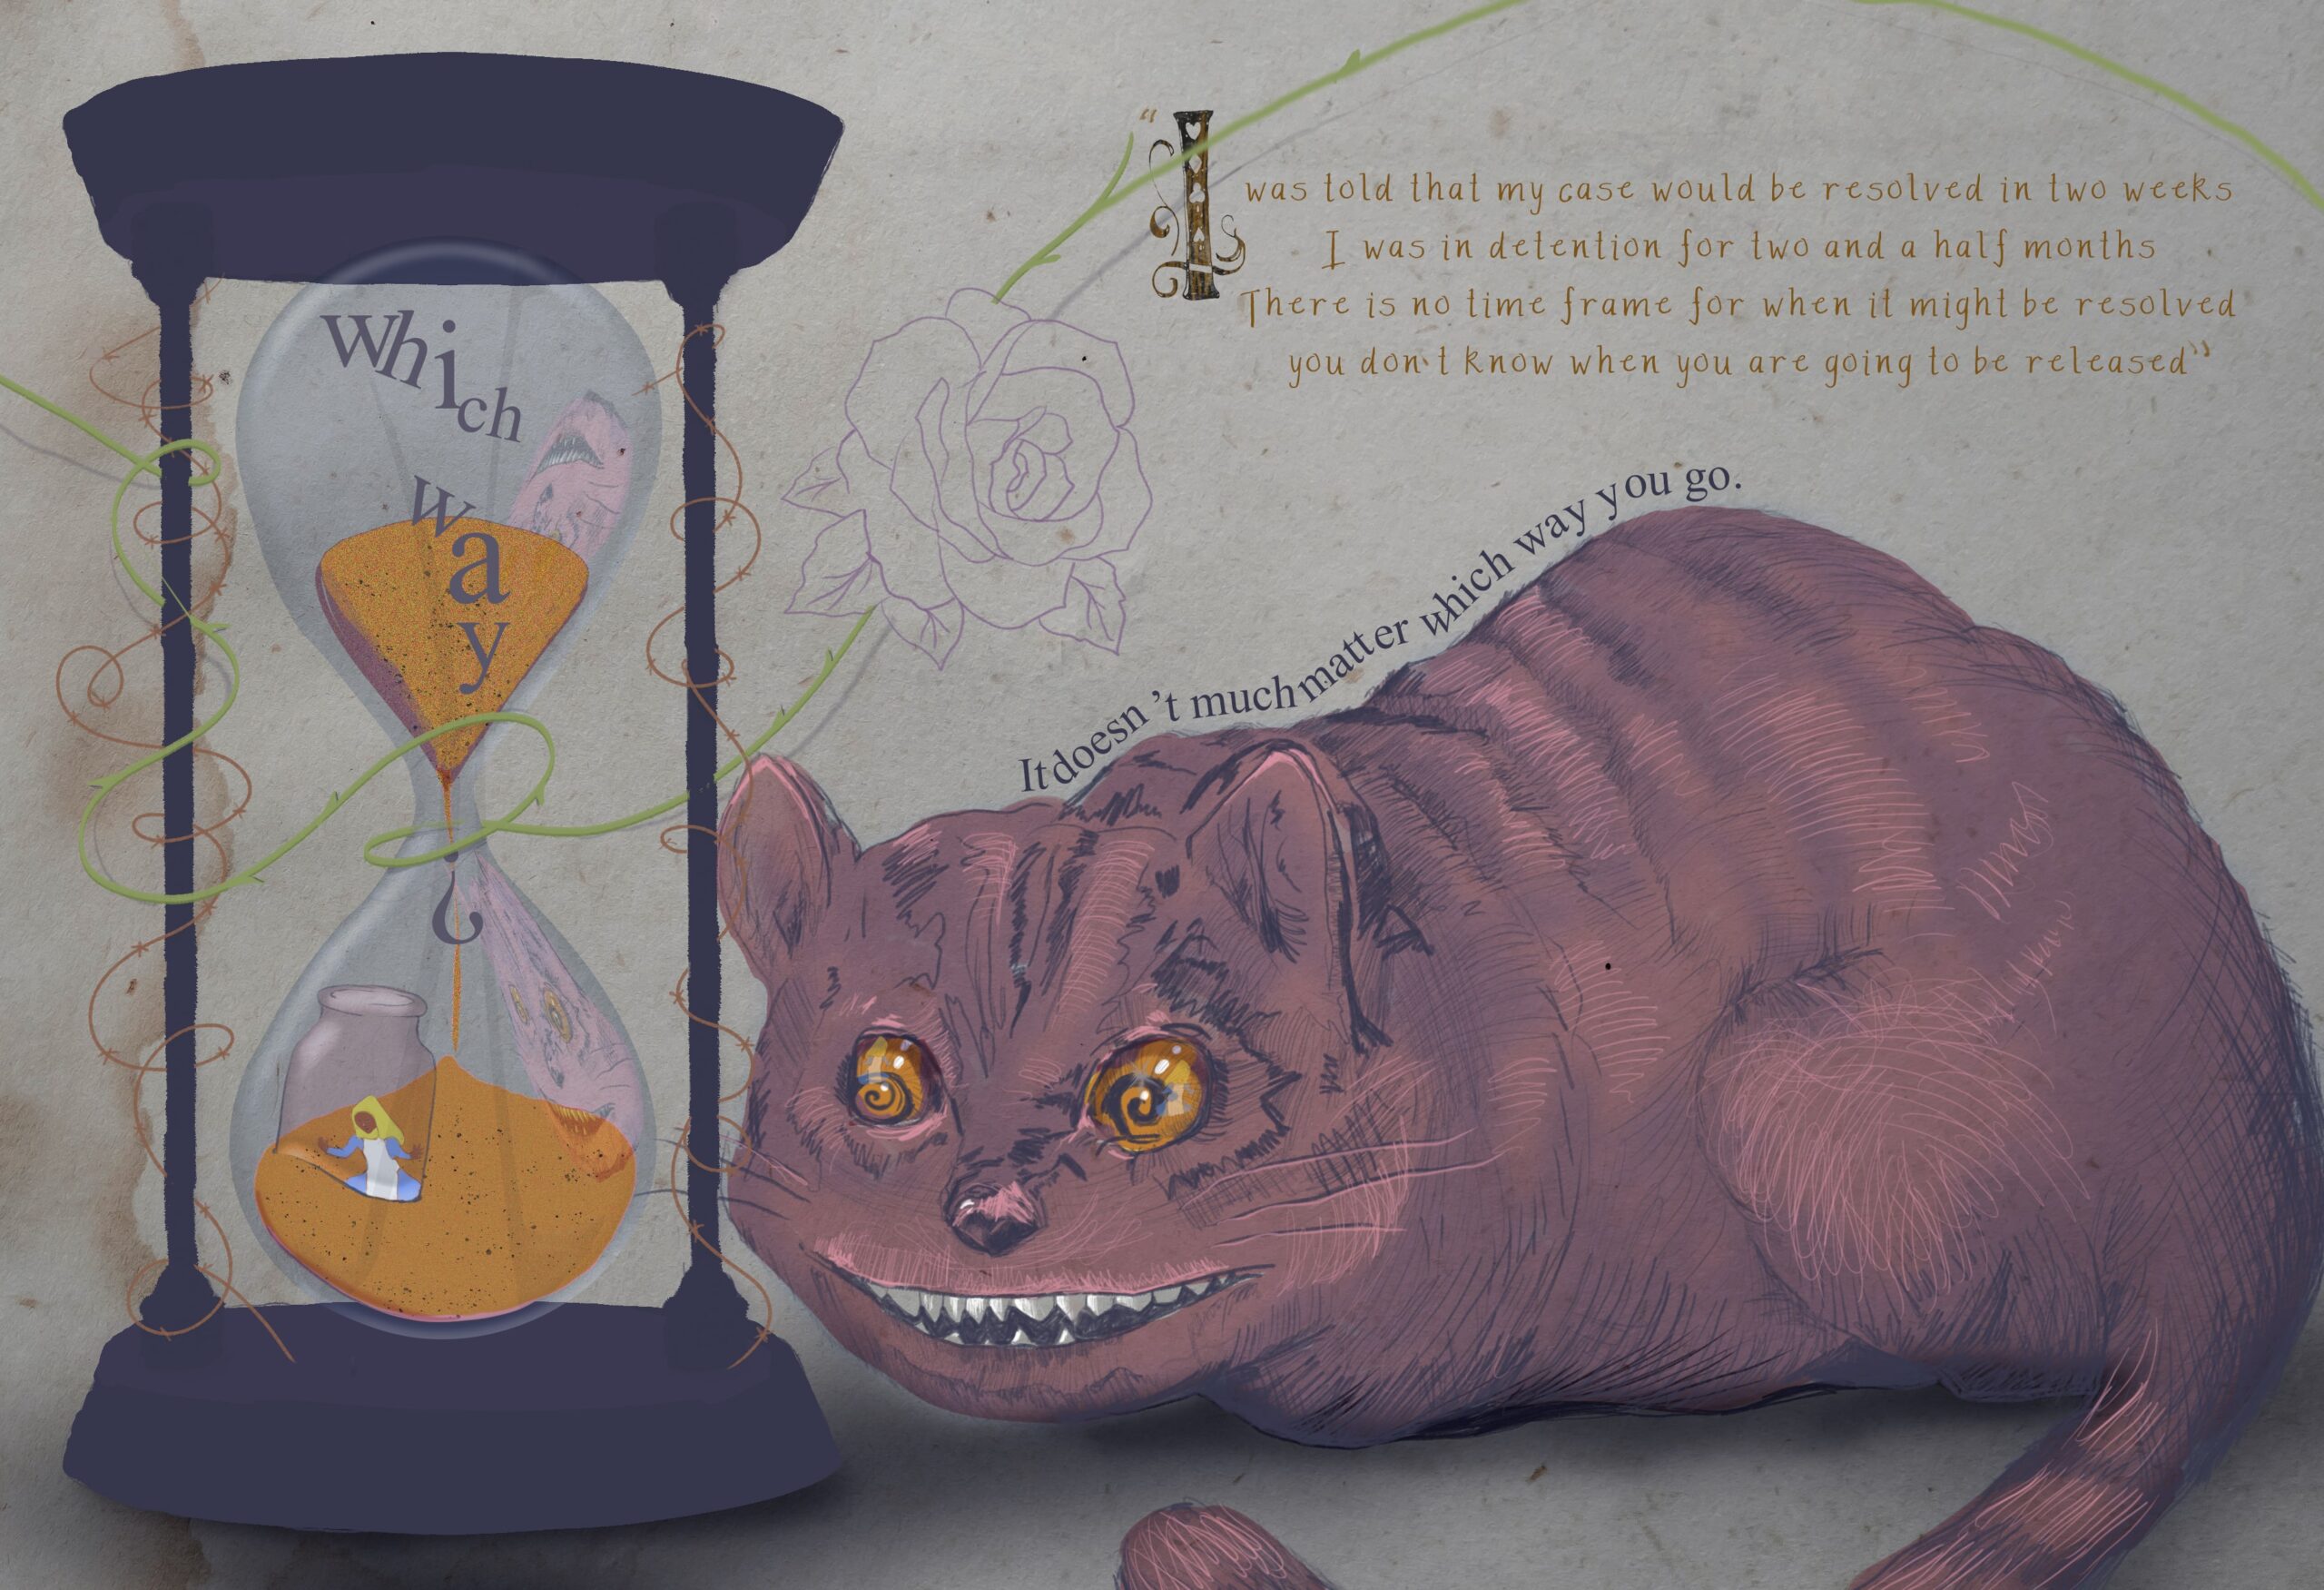 The image is of a sand timer, Alice is trapped in a jar inside the sand timer. The Cheshire cat looks on smiling. The caption reads " I was told that my case would be resolved in two weeks. I was in detention for two and a half months. There is no time frame for when it might be resolved, you don't know when you are going to be released."